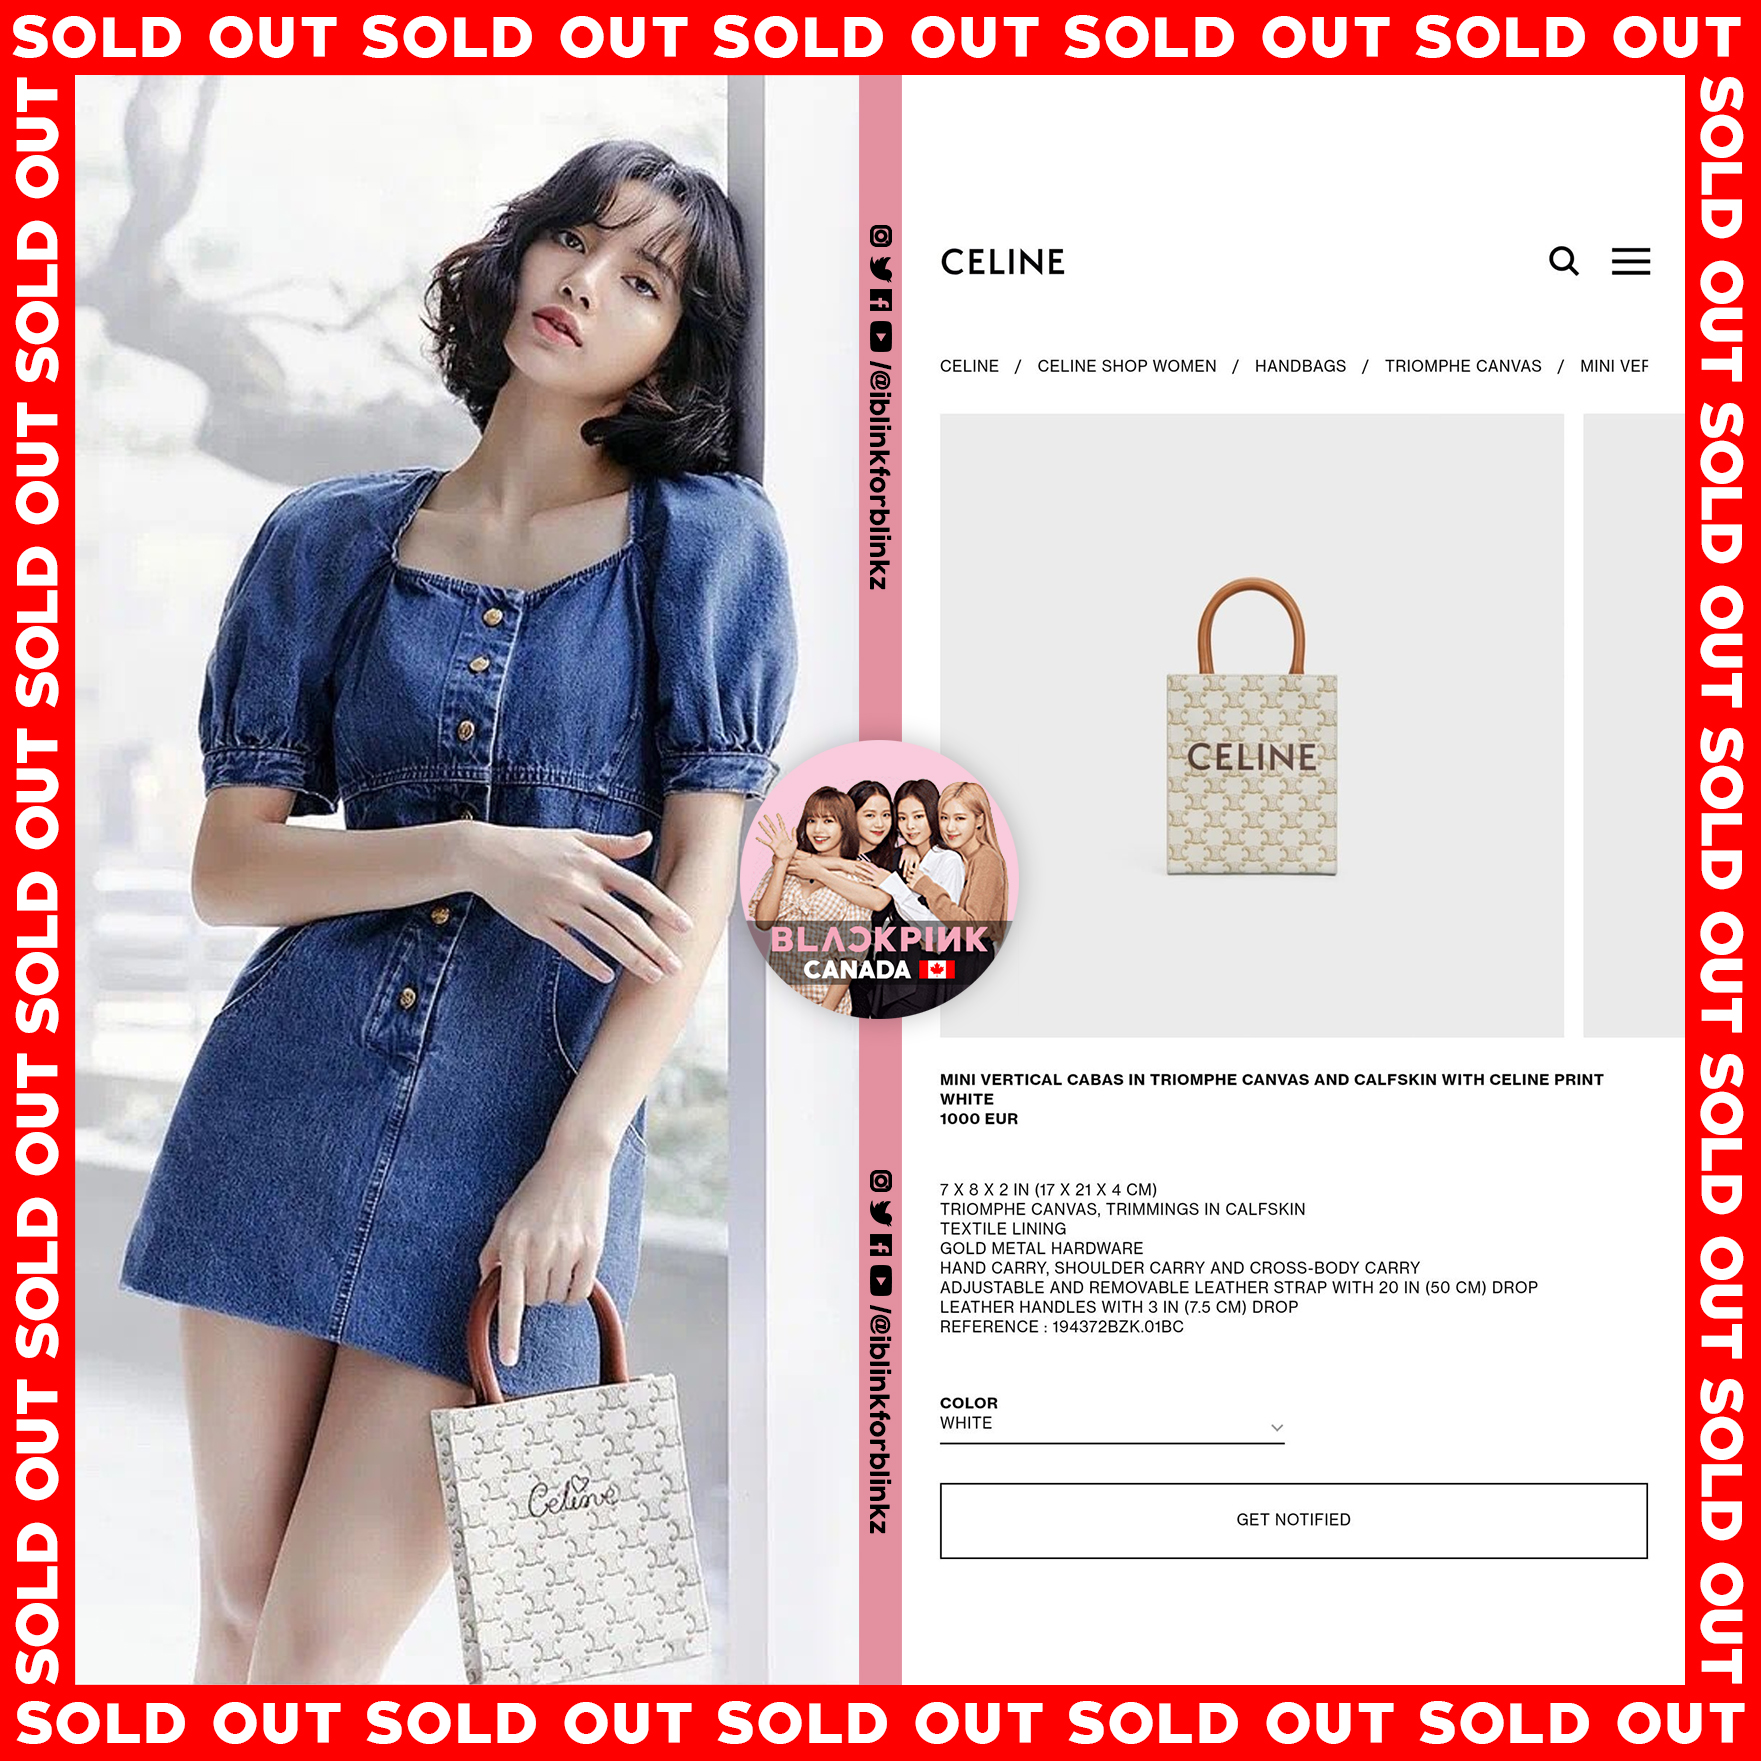 BLACKPINK CANADA 🇨🇦 2.0 on X: The power of LISA SOLD OUT item